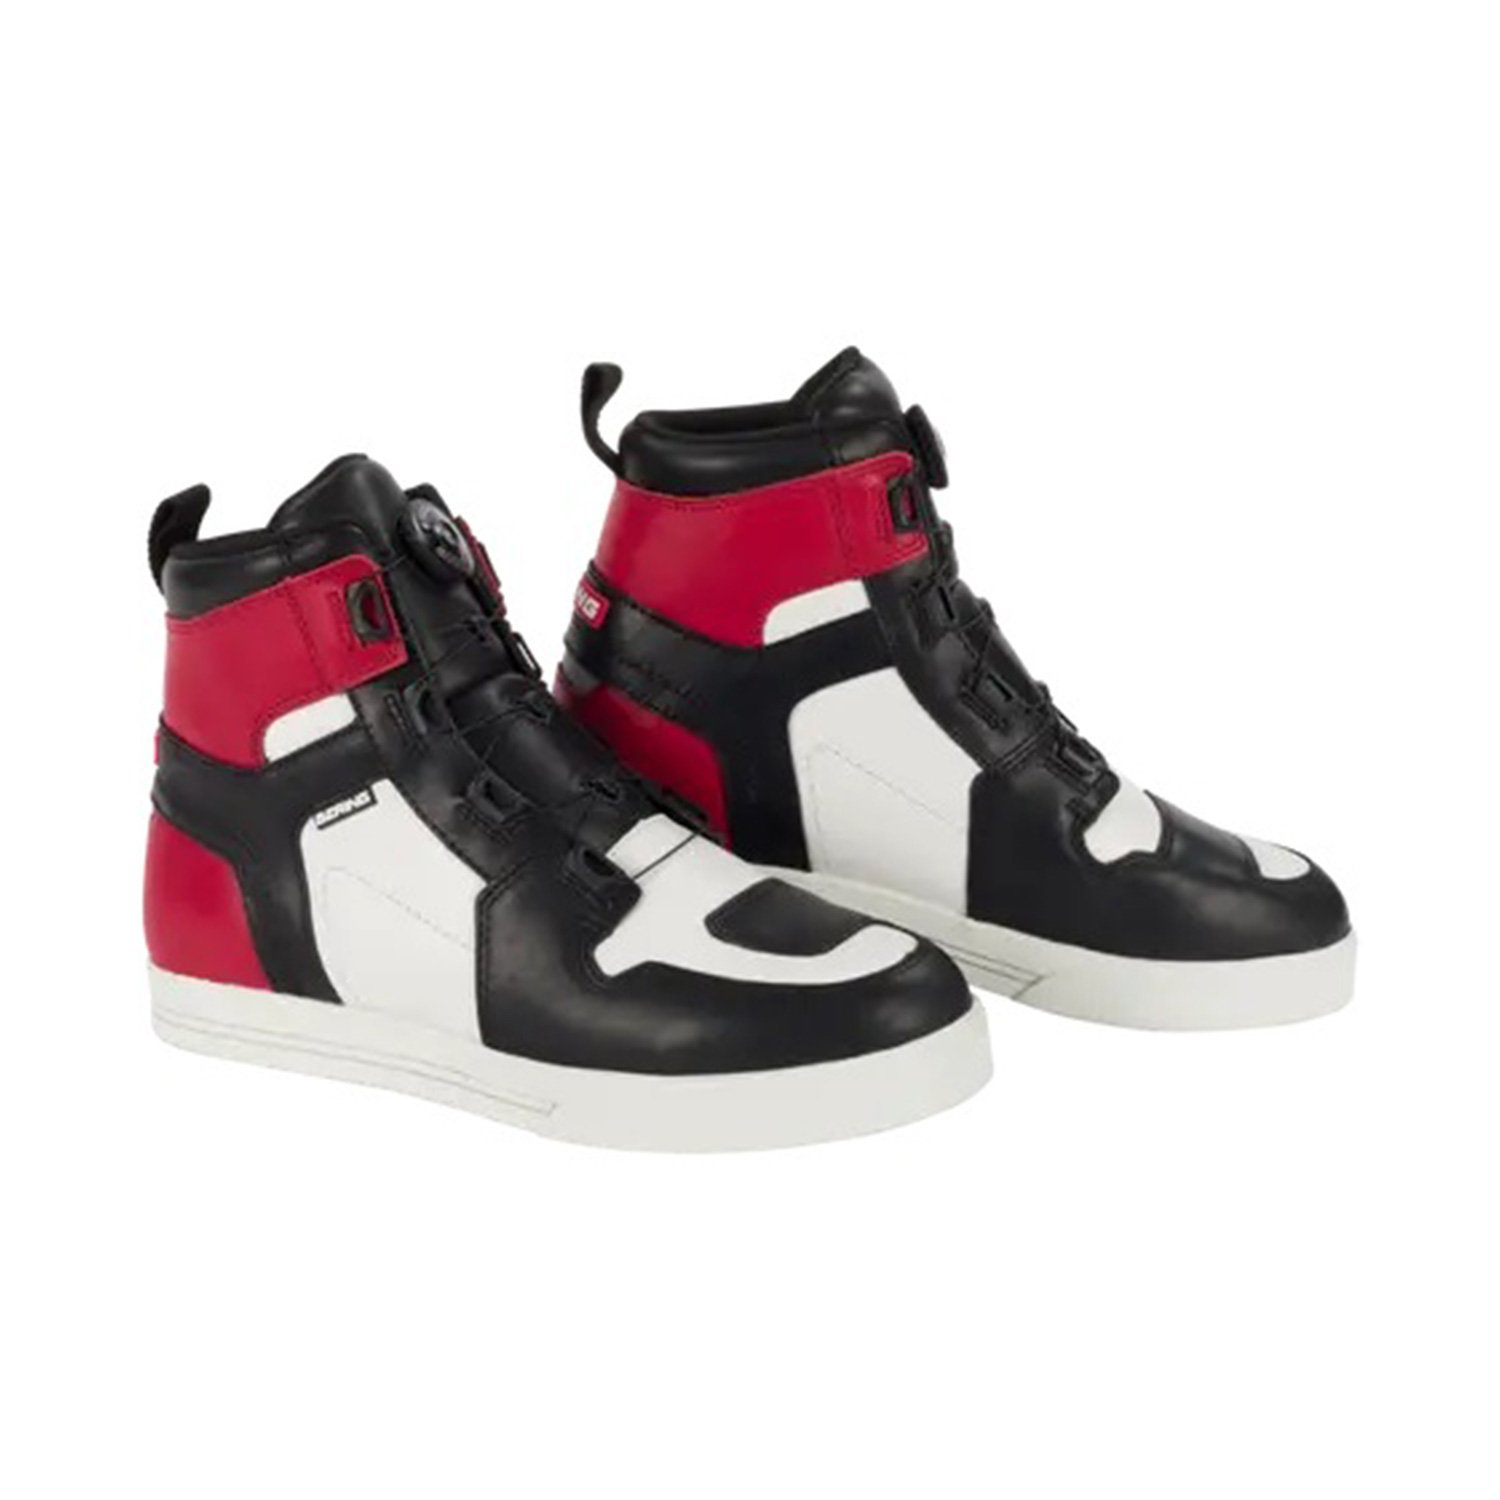 Image of Bering Sneakers Reflex A-Top Black White Red Size 46 ID 3660815176726